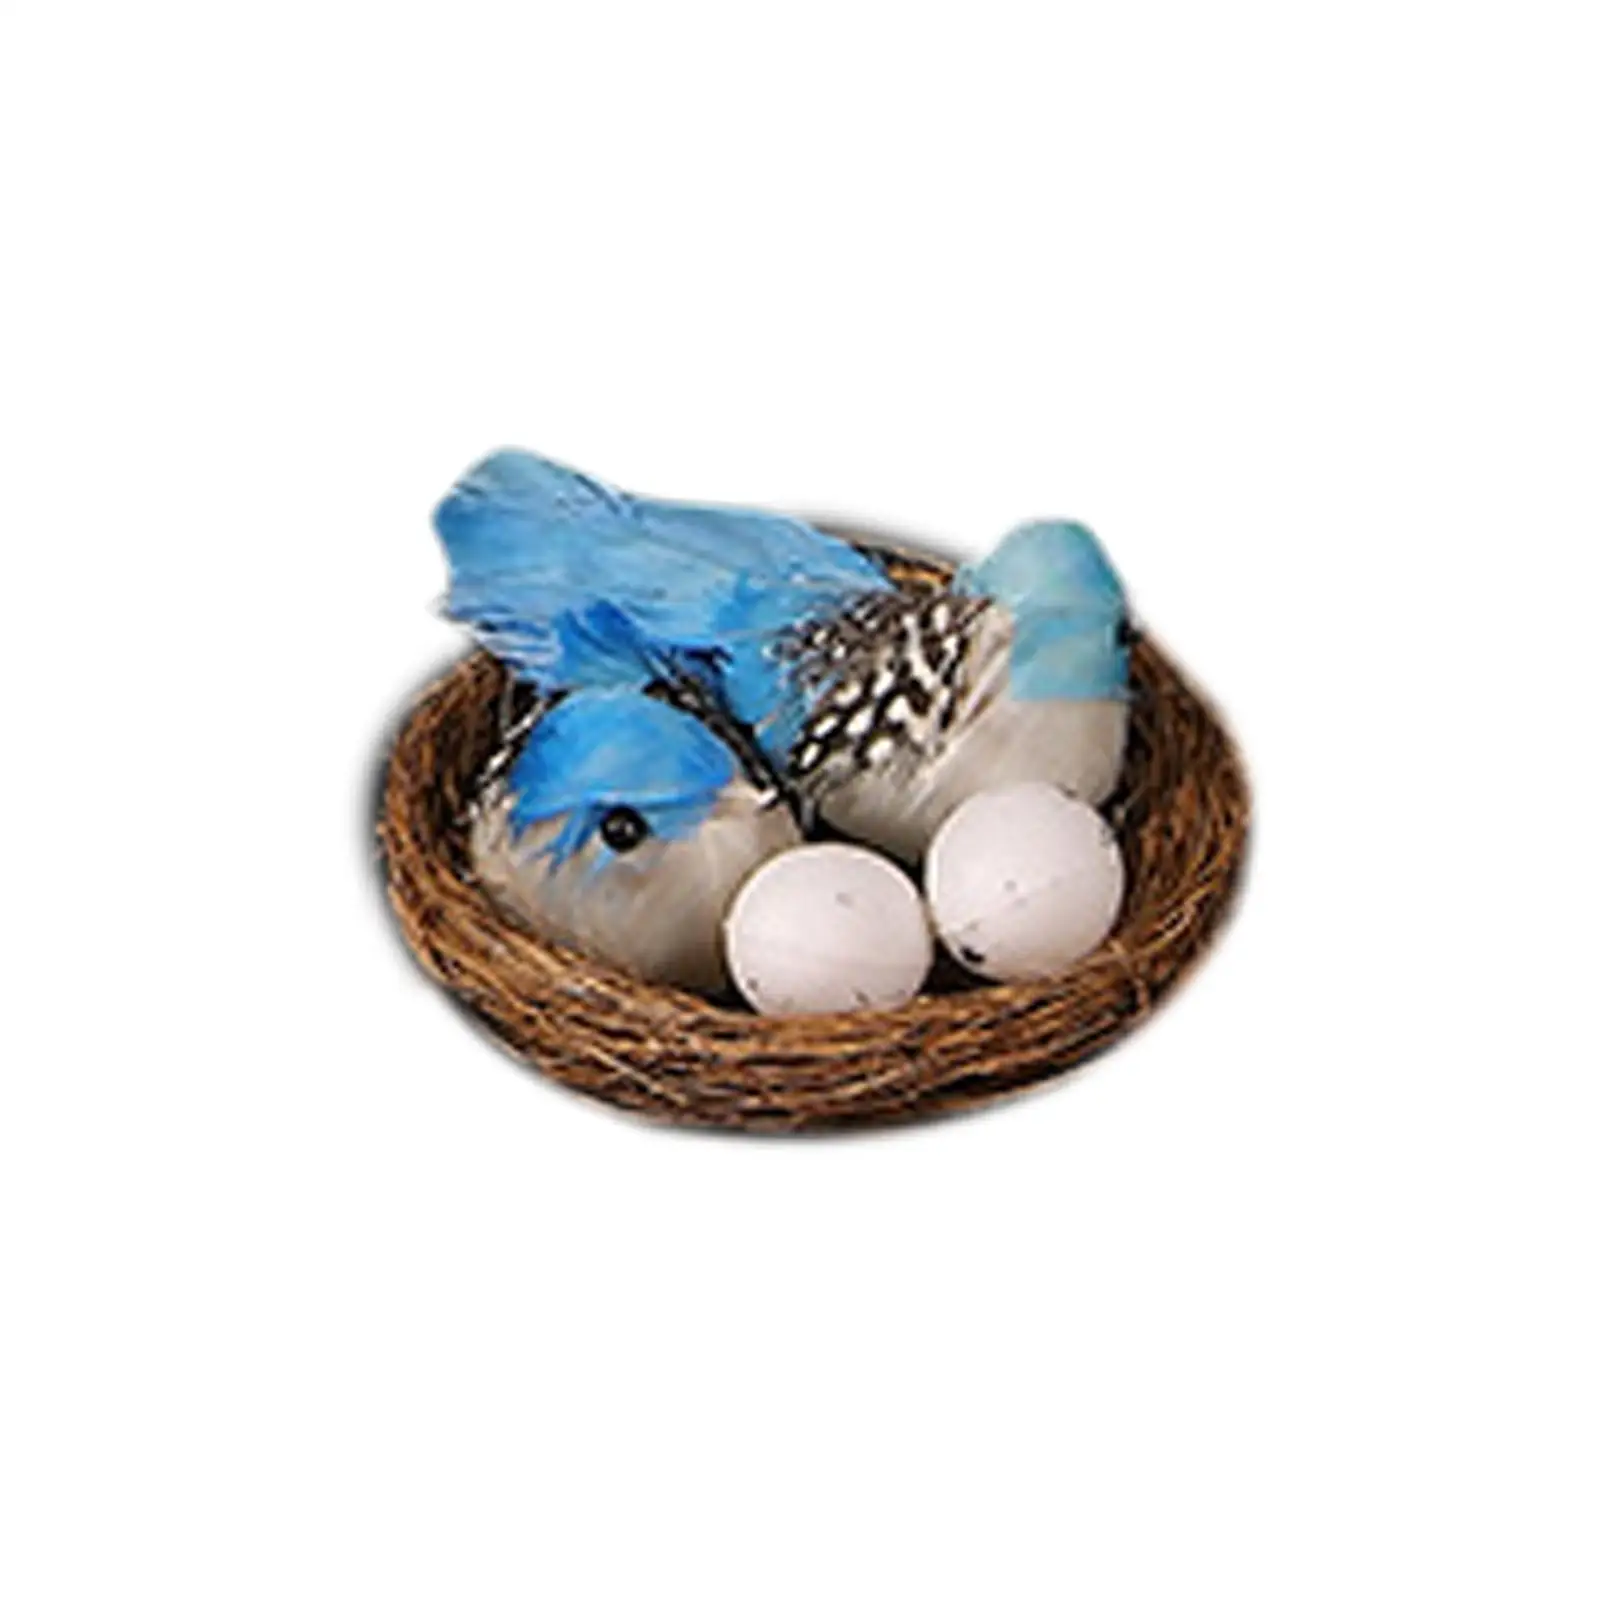 Artificial Easter Birds Nest with Eggs Lifelike for Easter Tree Decor